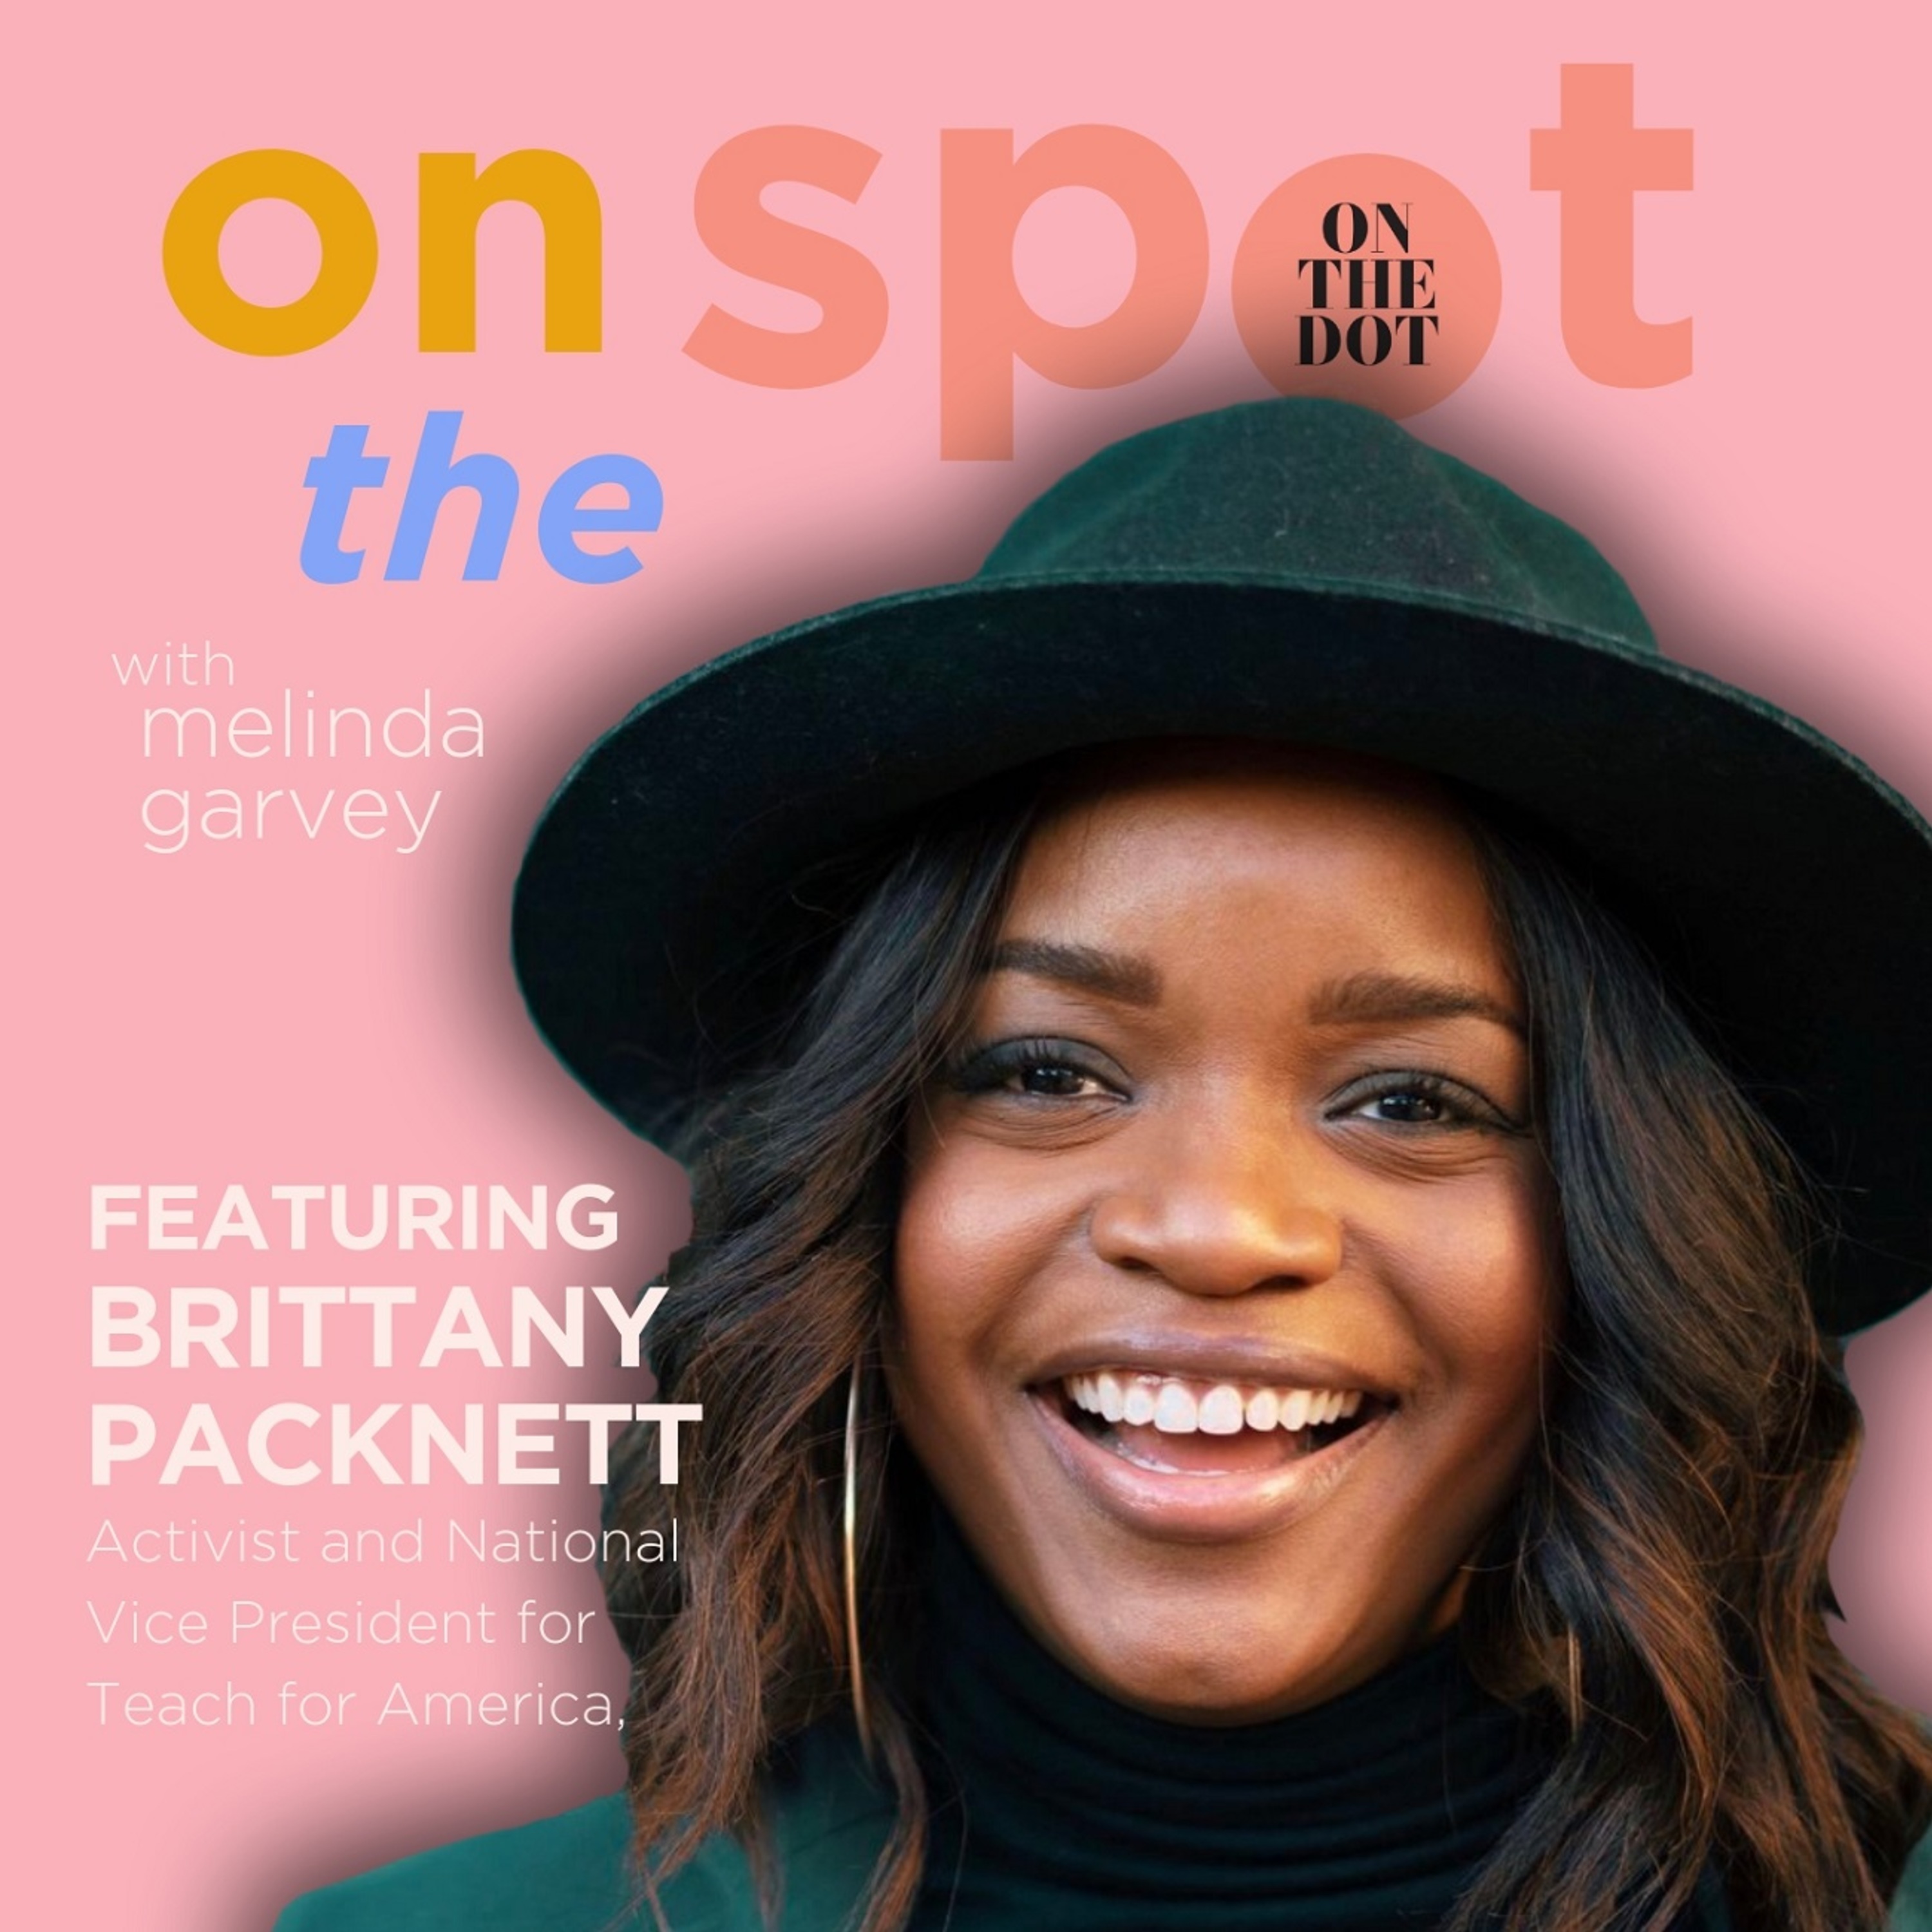 Episode 26: On The Spot Featuring Brittany Packnett